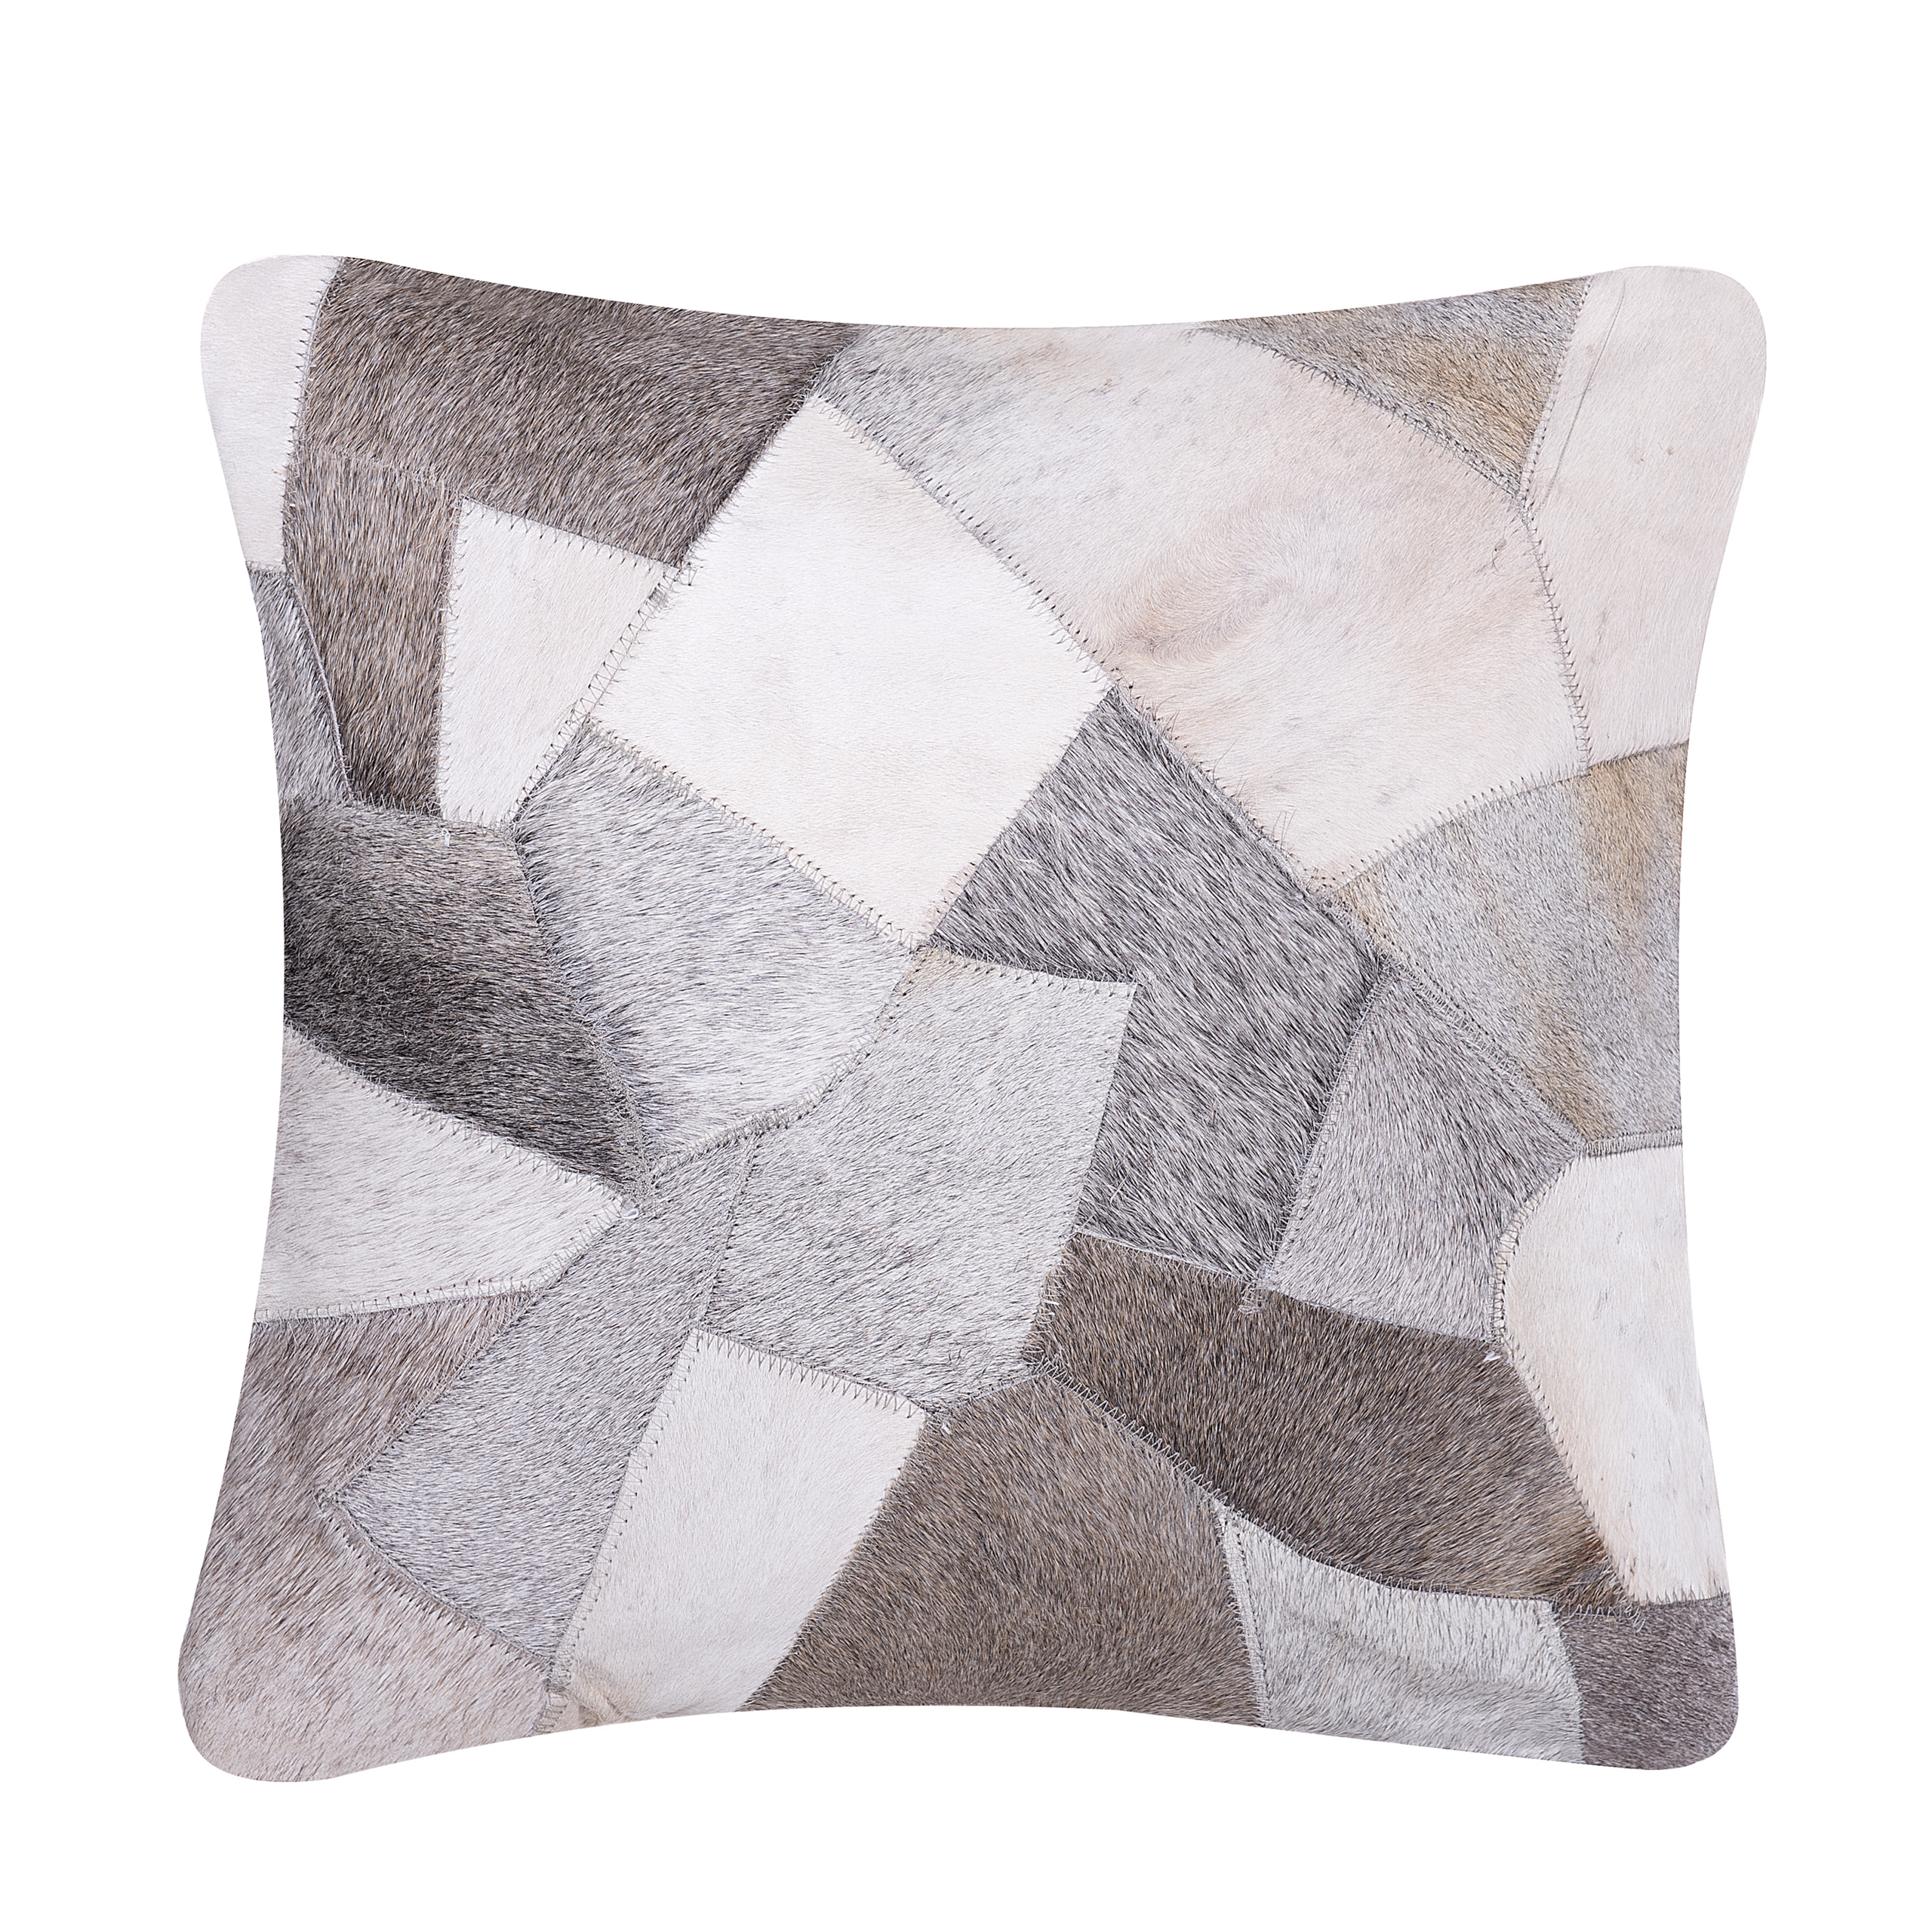 Beliani Decorative Cushion Grey Cowhide Leather Patchwork 45 x 45 cm Country Modern Decor Accessories